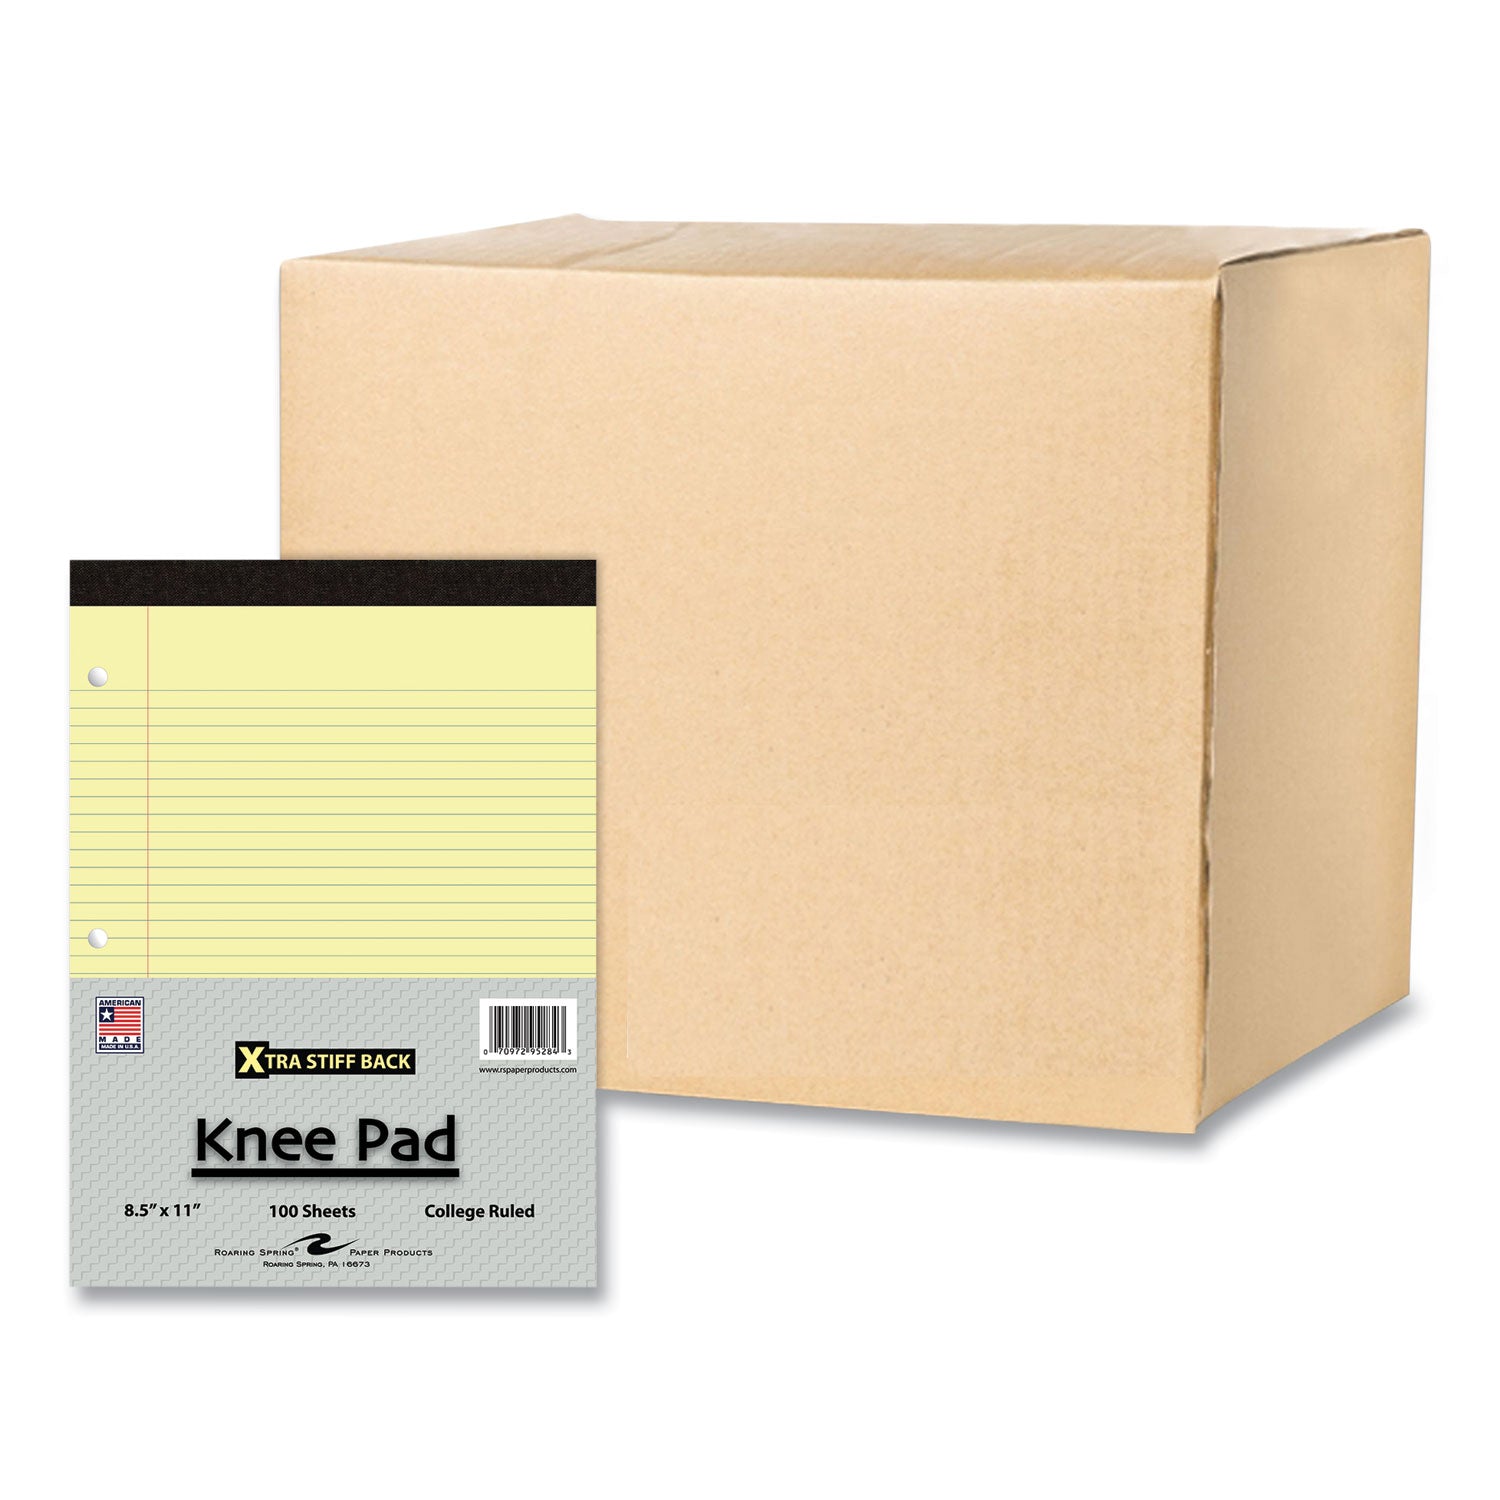 stiff-back-pad-medium-college-rule-100-canary-85-x-11-sheets-36-carton-ships-in-4-6-business-days_roa95284cs - 1